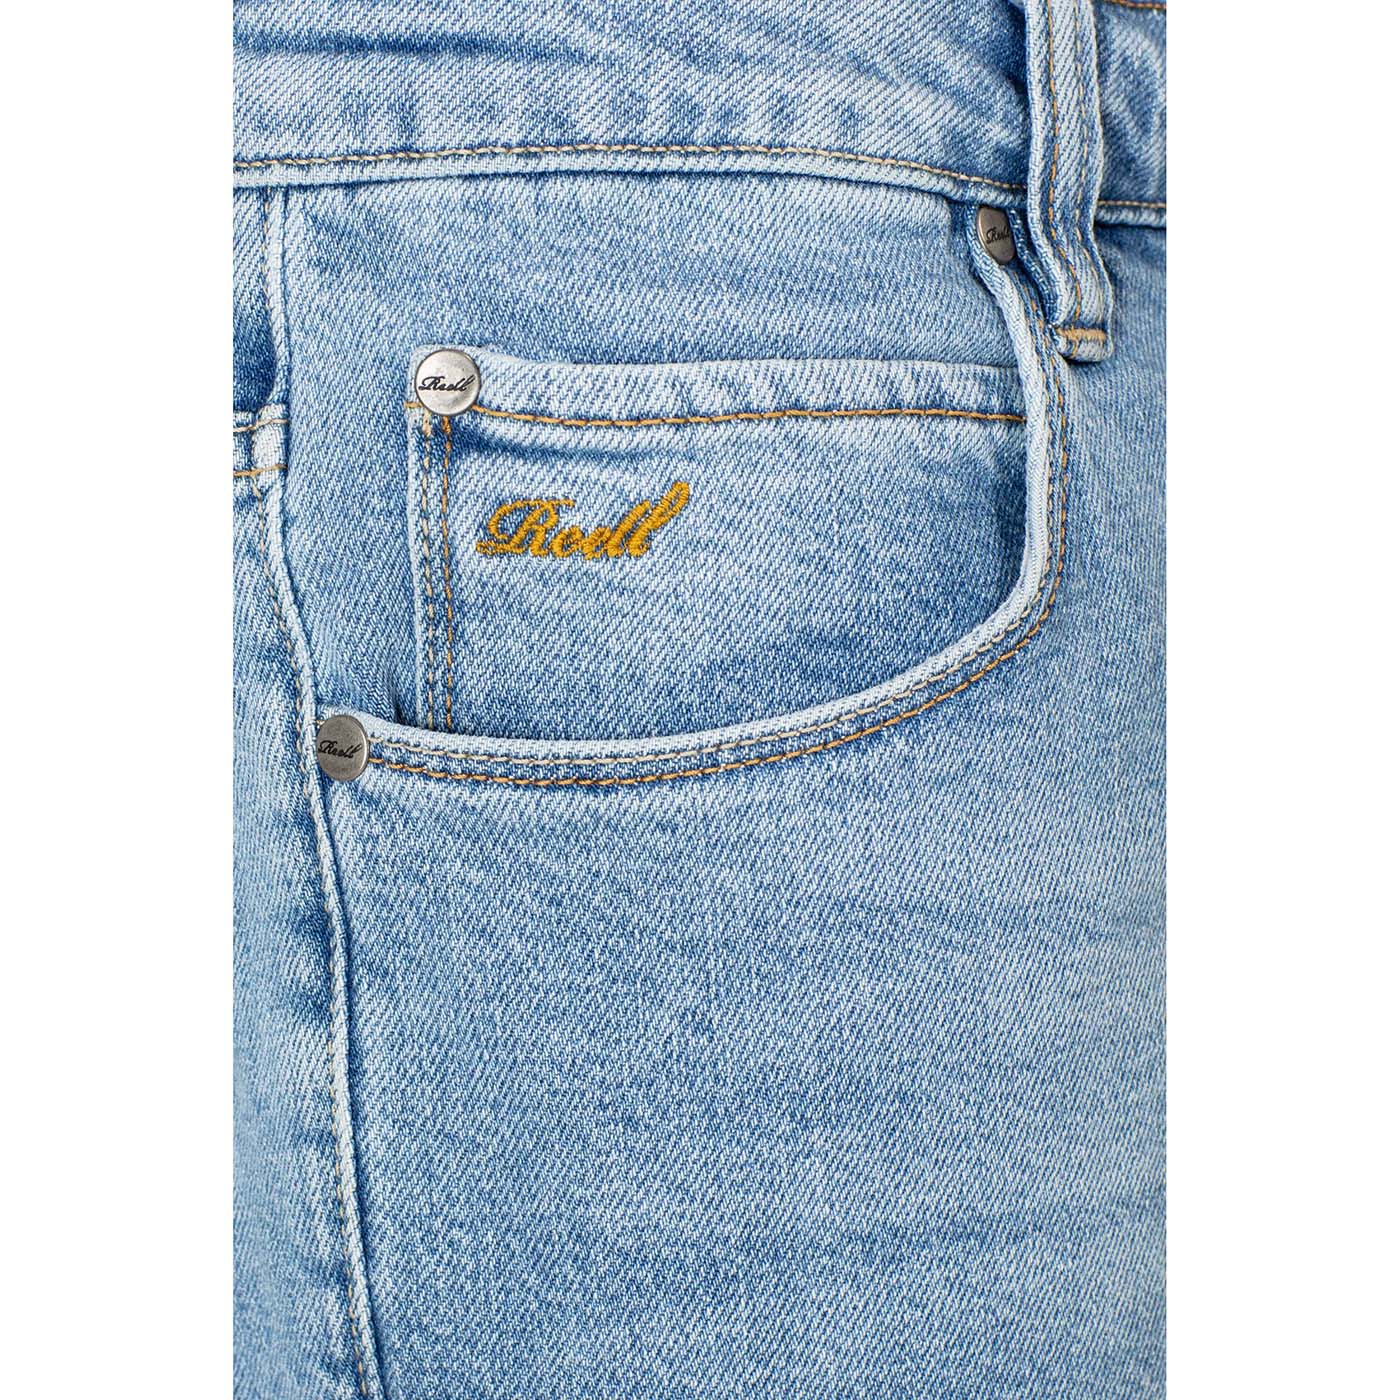 Reell Jeans Rafter Shorts 2 Light Blue Stone